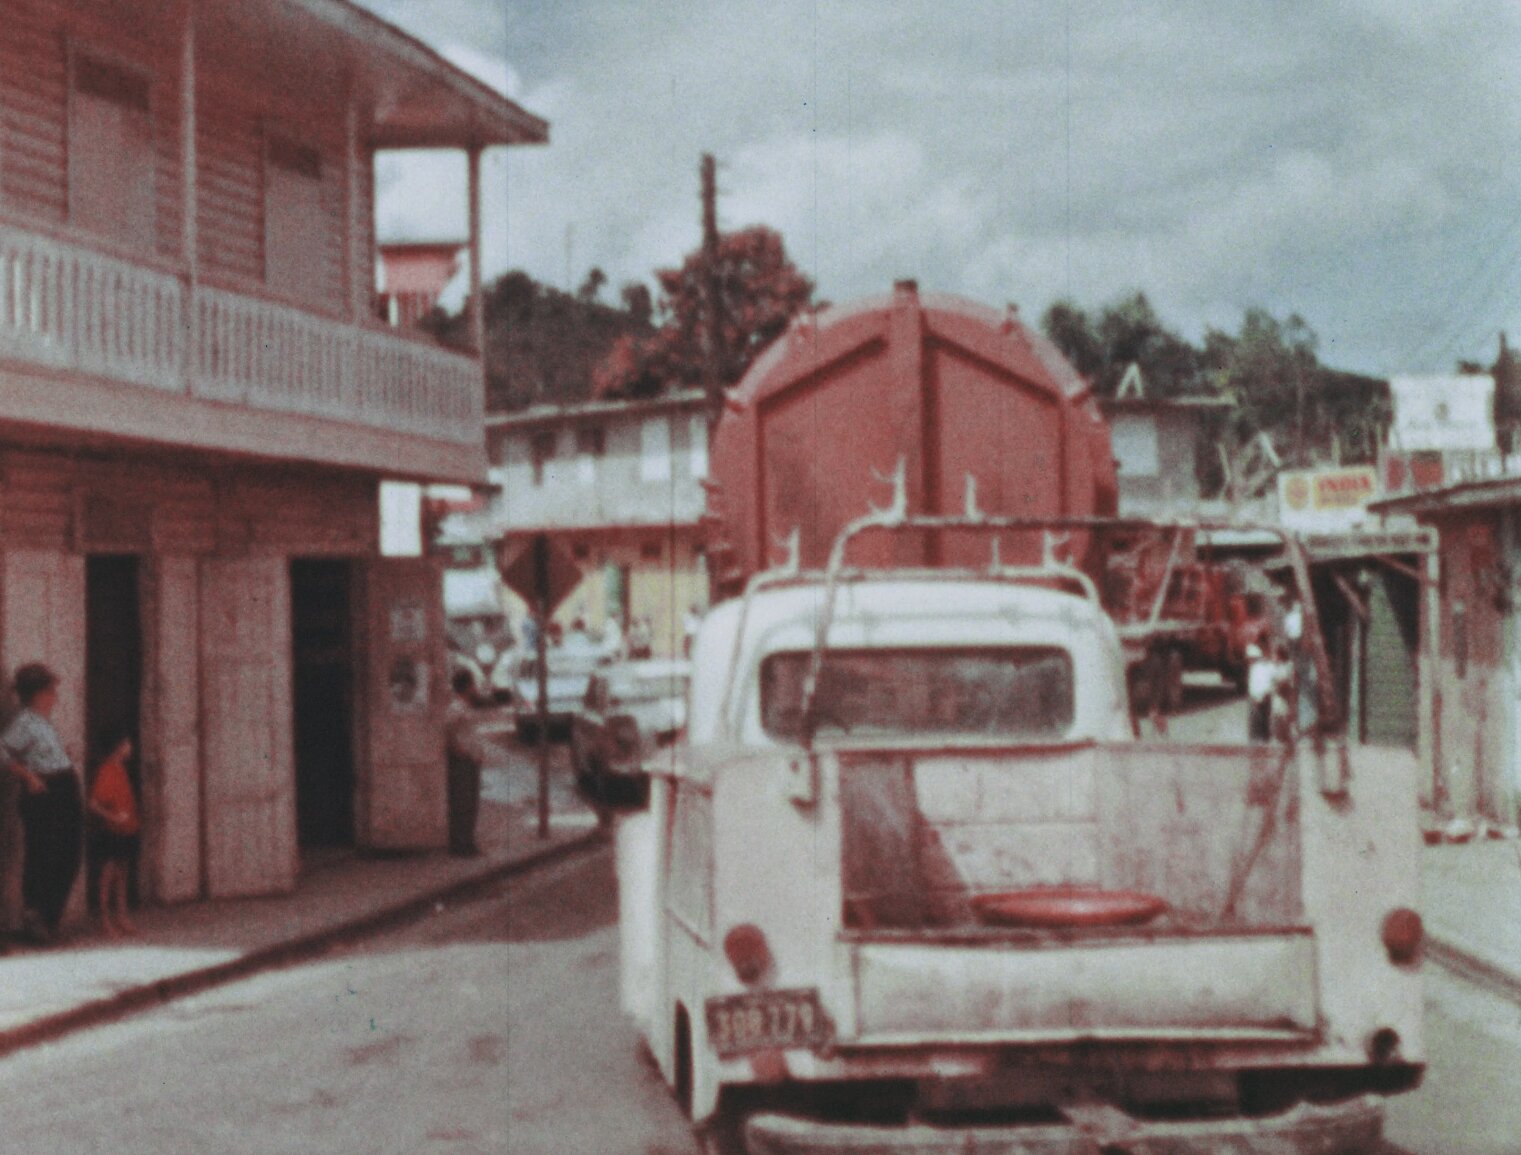 Convoy of trucks carrying the BONUS reactor vessel through a town in Puerto Rico. Adults in hats and barefoot kids stand by watching. Several two-story buildings are seen.